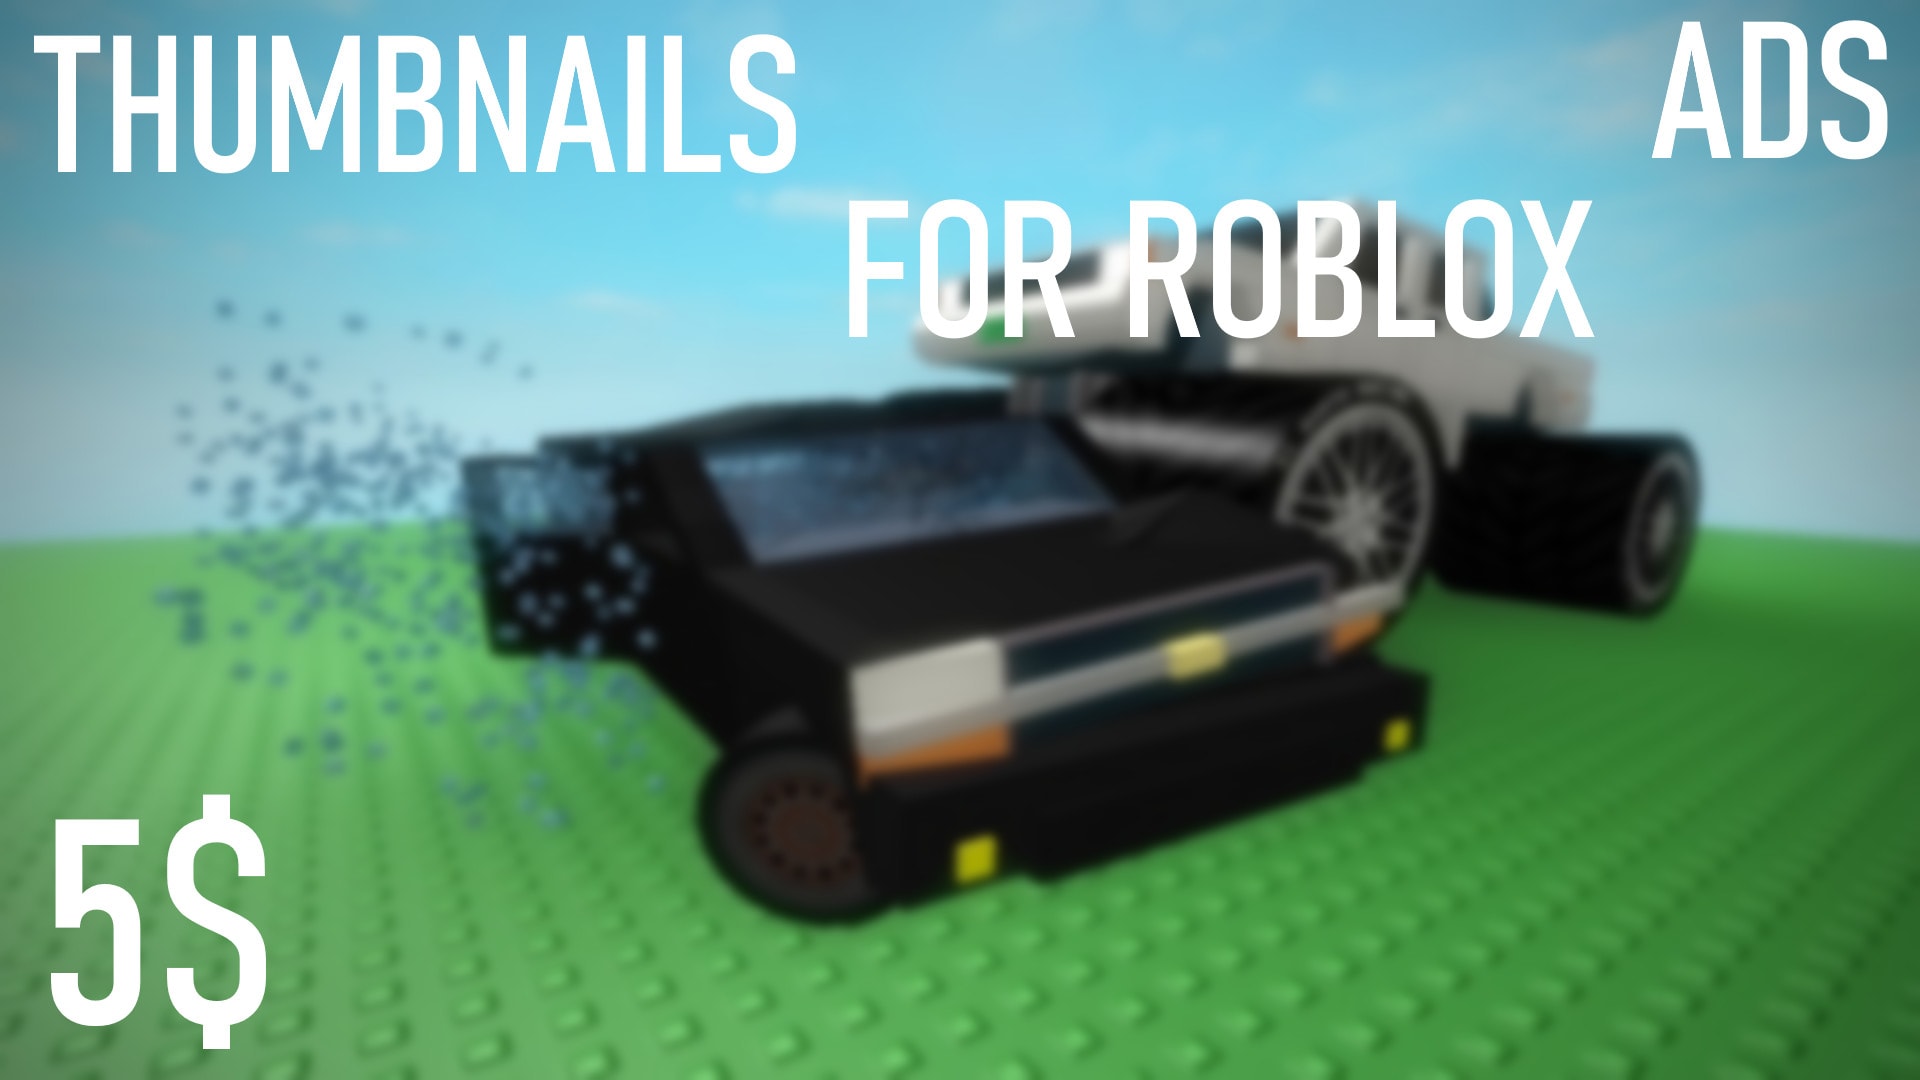 Make You A Roblox Thumbnail Or Ad In Under 1 Hour By Gabedaboy - make an ad for roblox